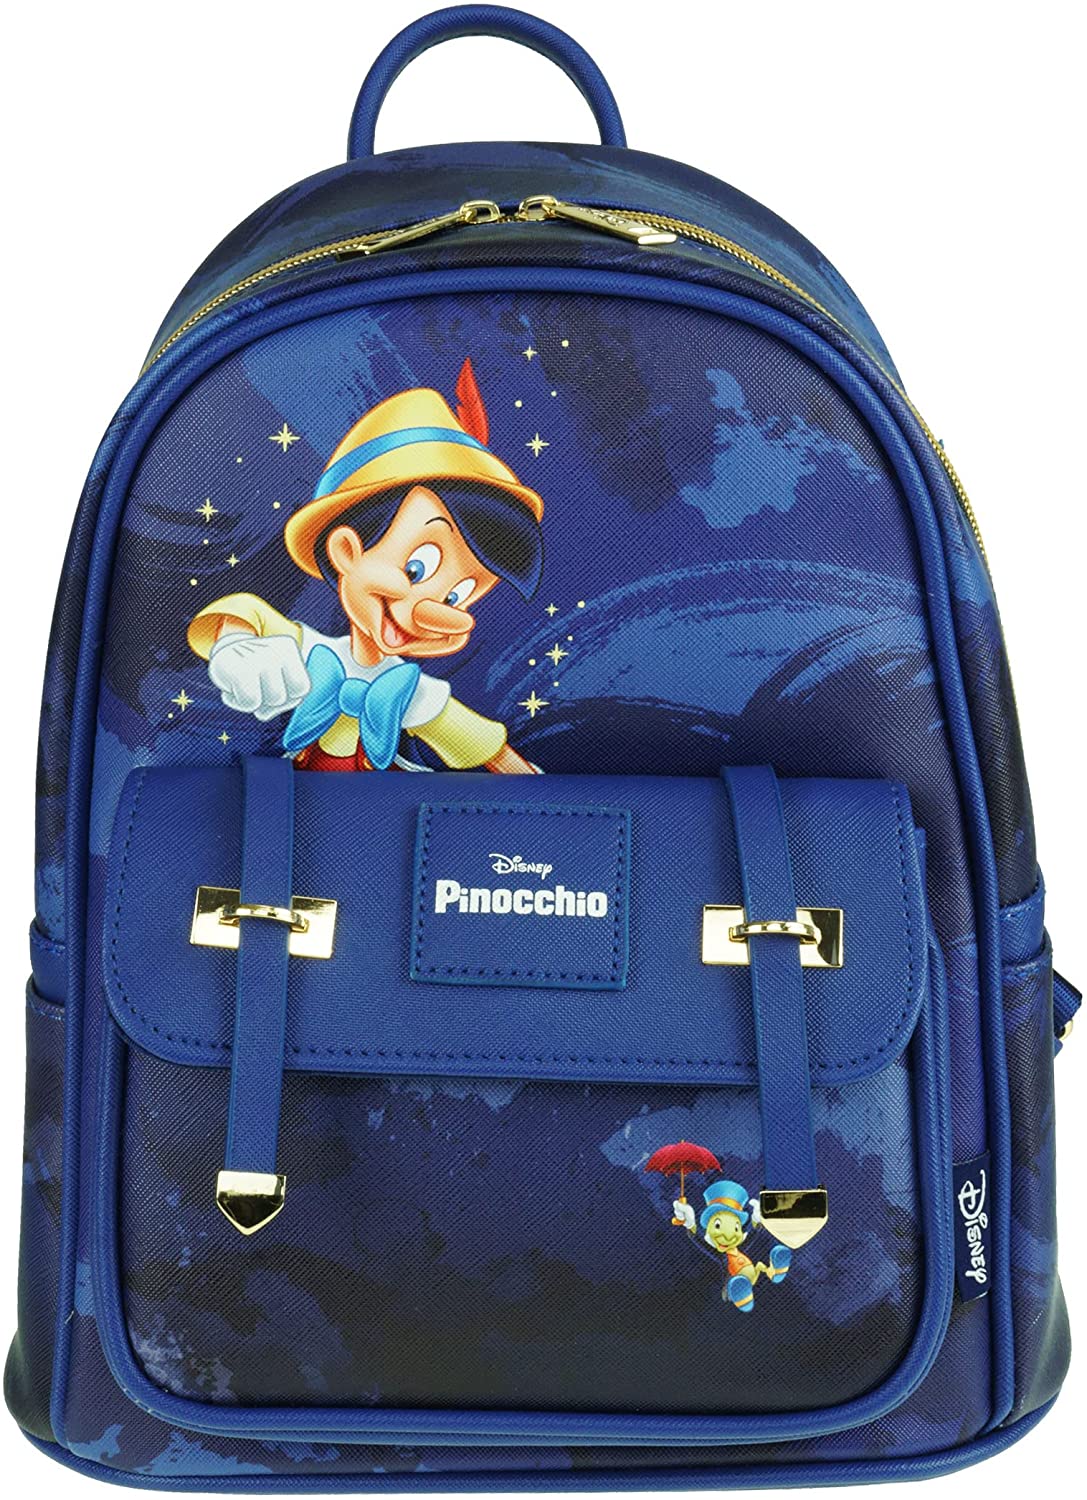 Pinocchio 11" Vegan Leather Mini Backpack - A21832 – GTE Zone